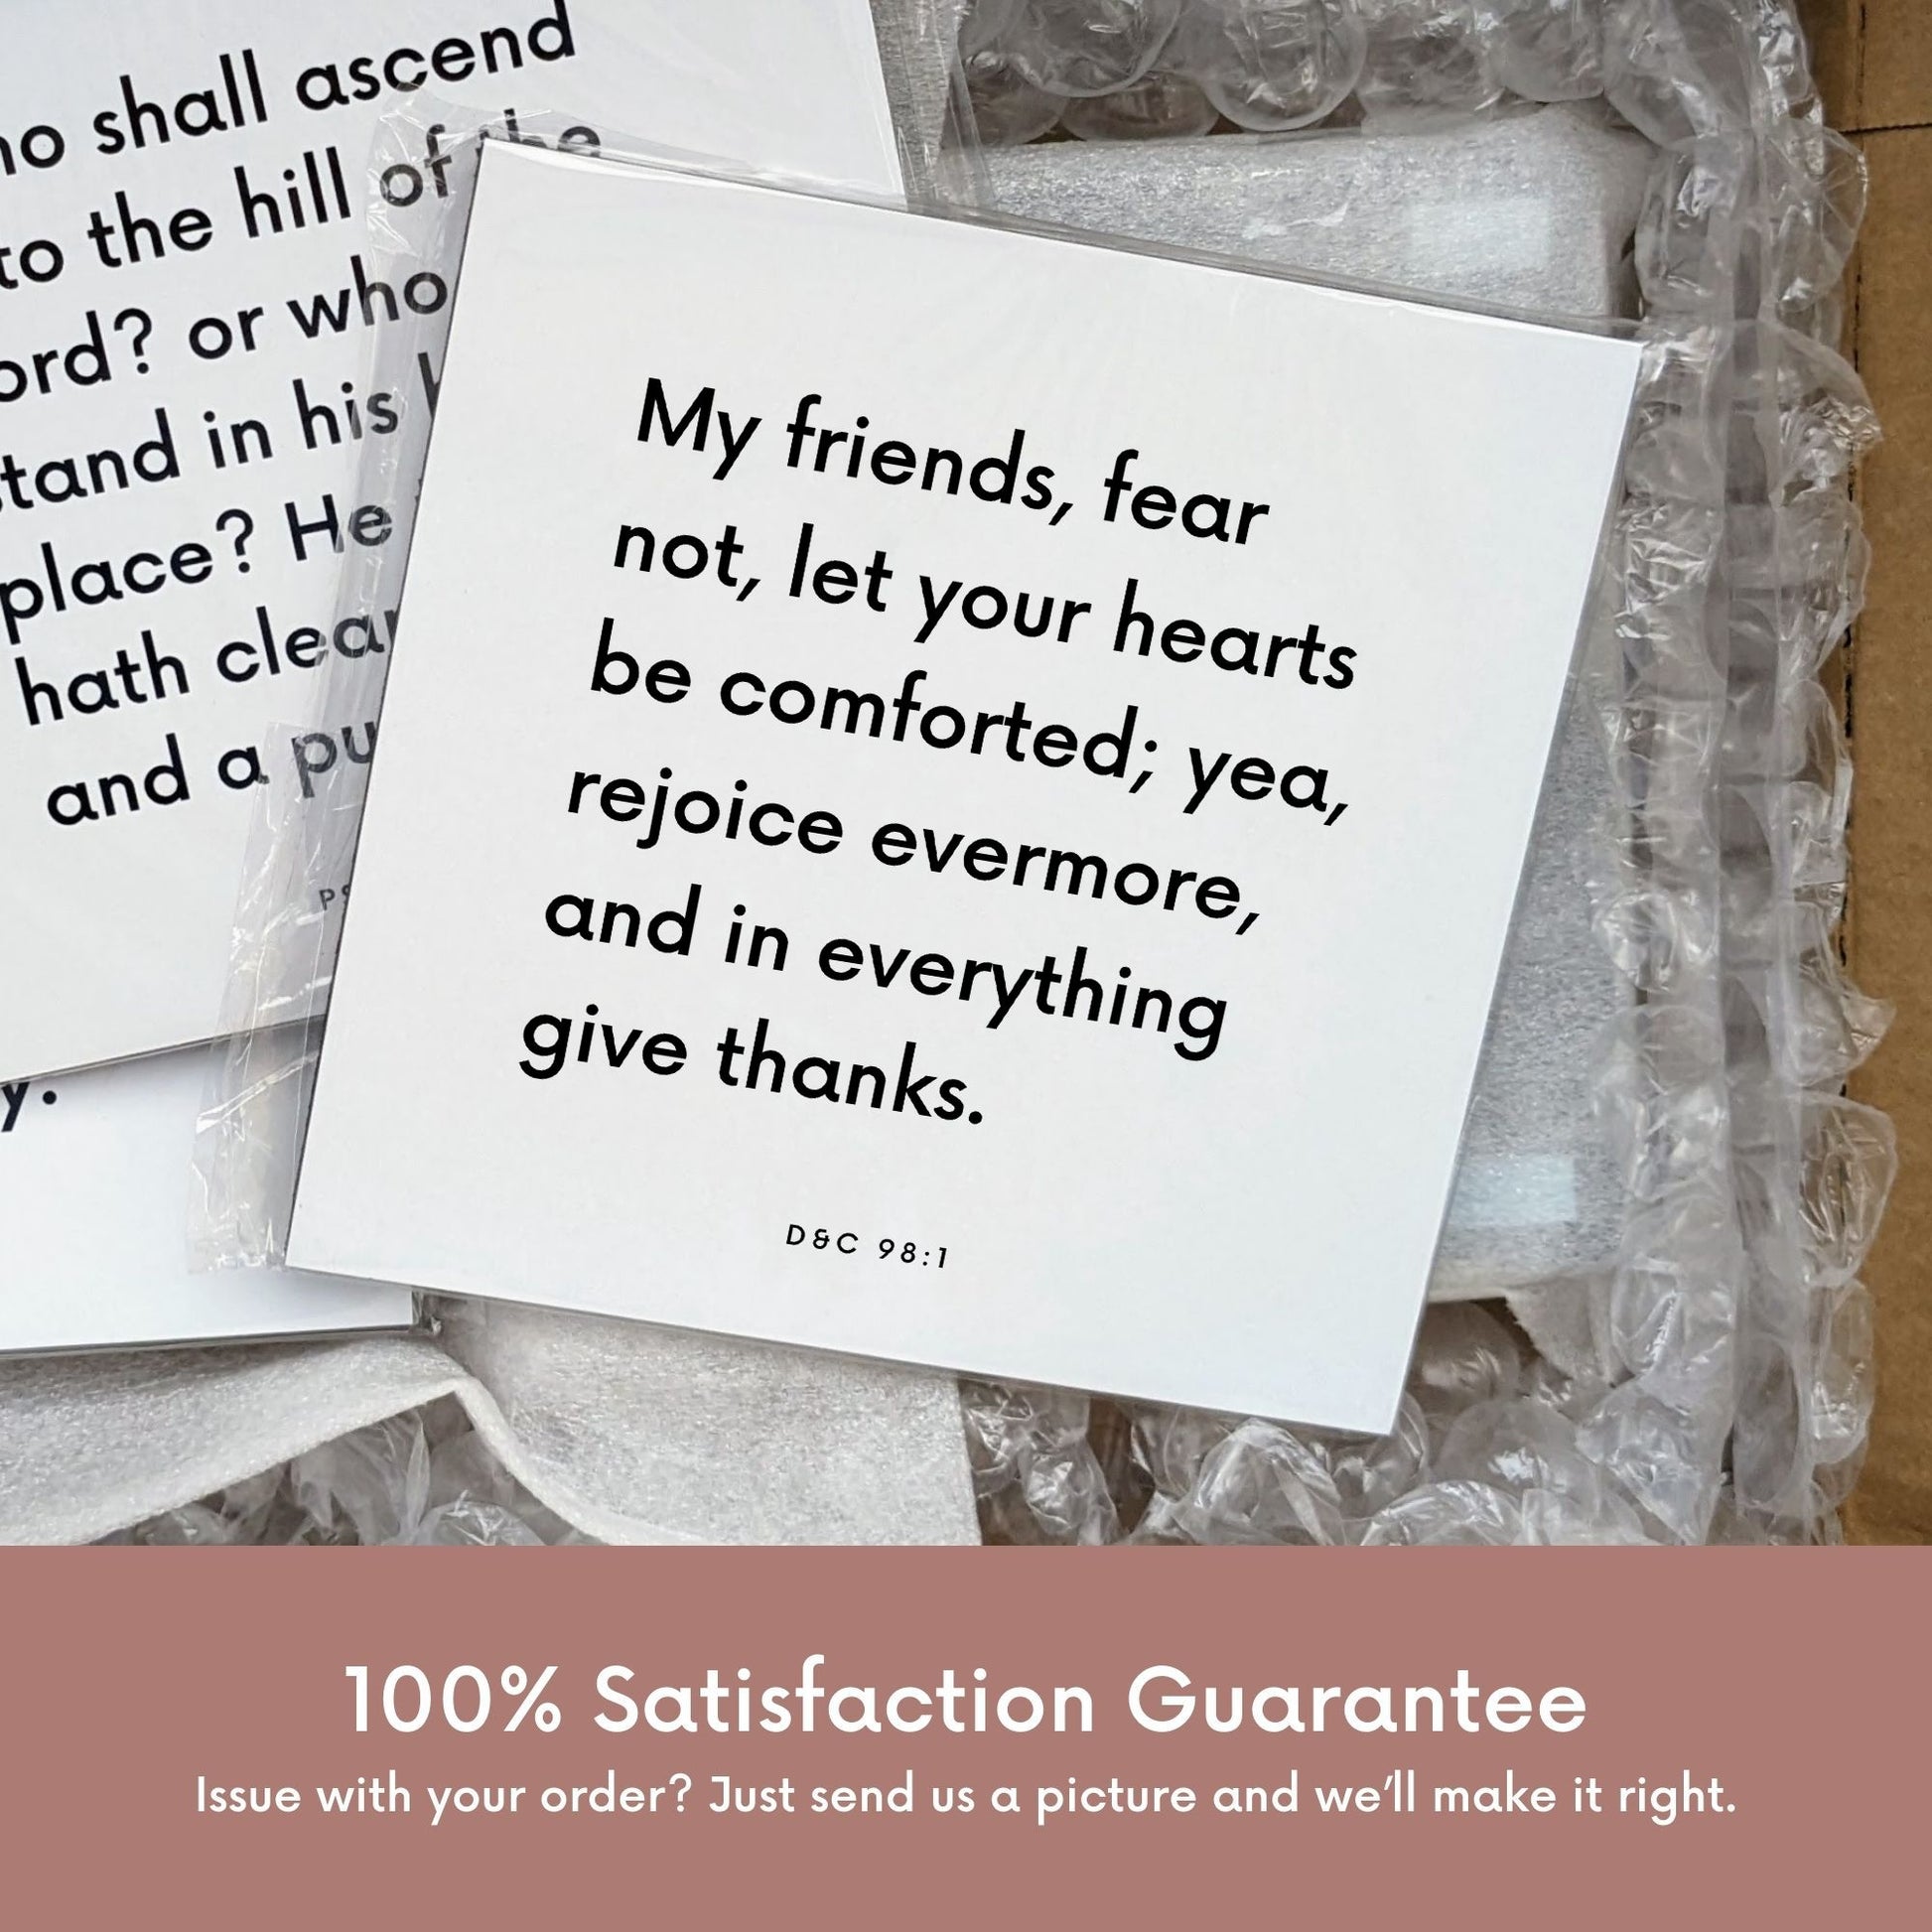 Shipping materials for scripture tile of D&C 98:1 - "My friends, fear not, let your hearts be comforted"